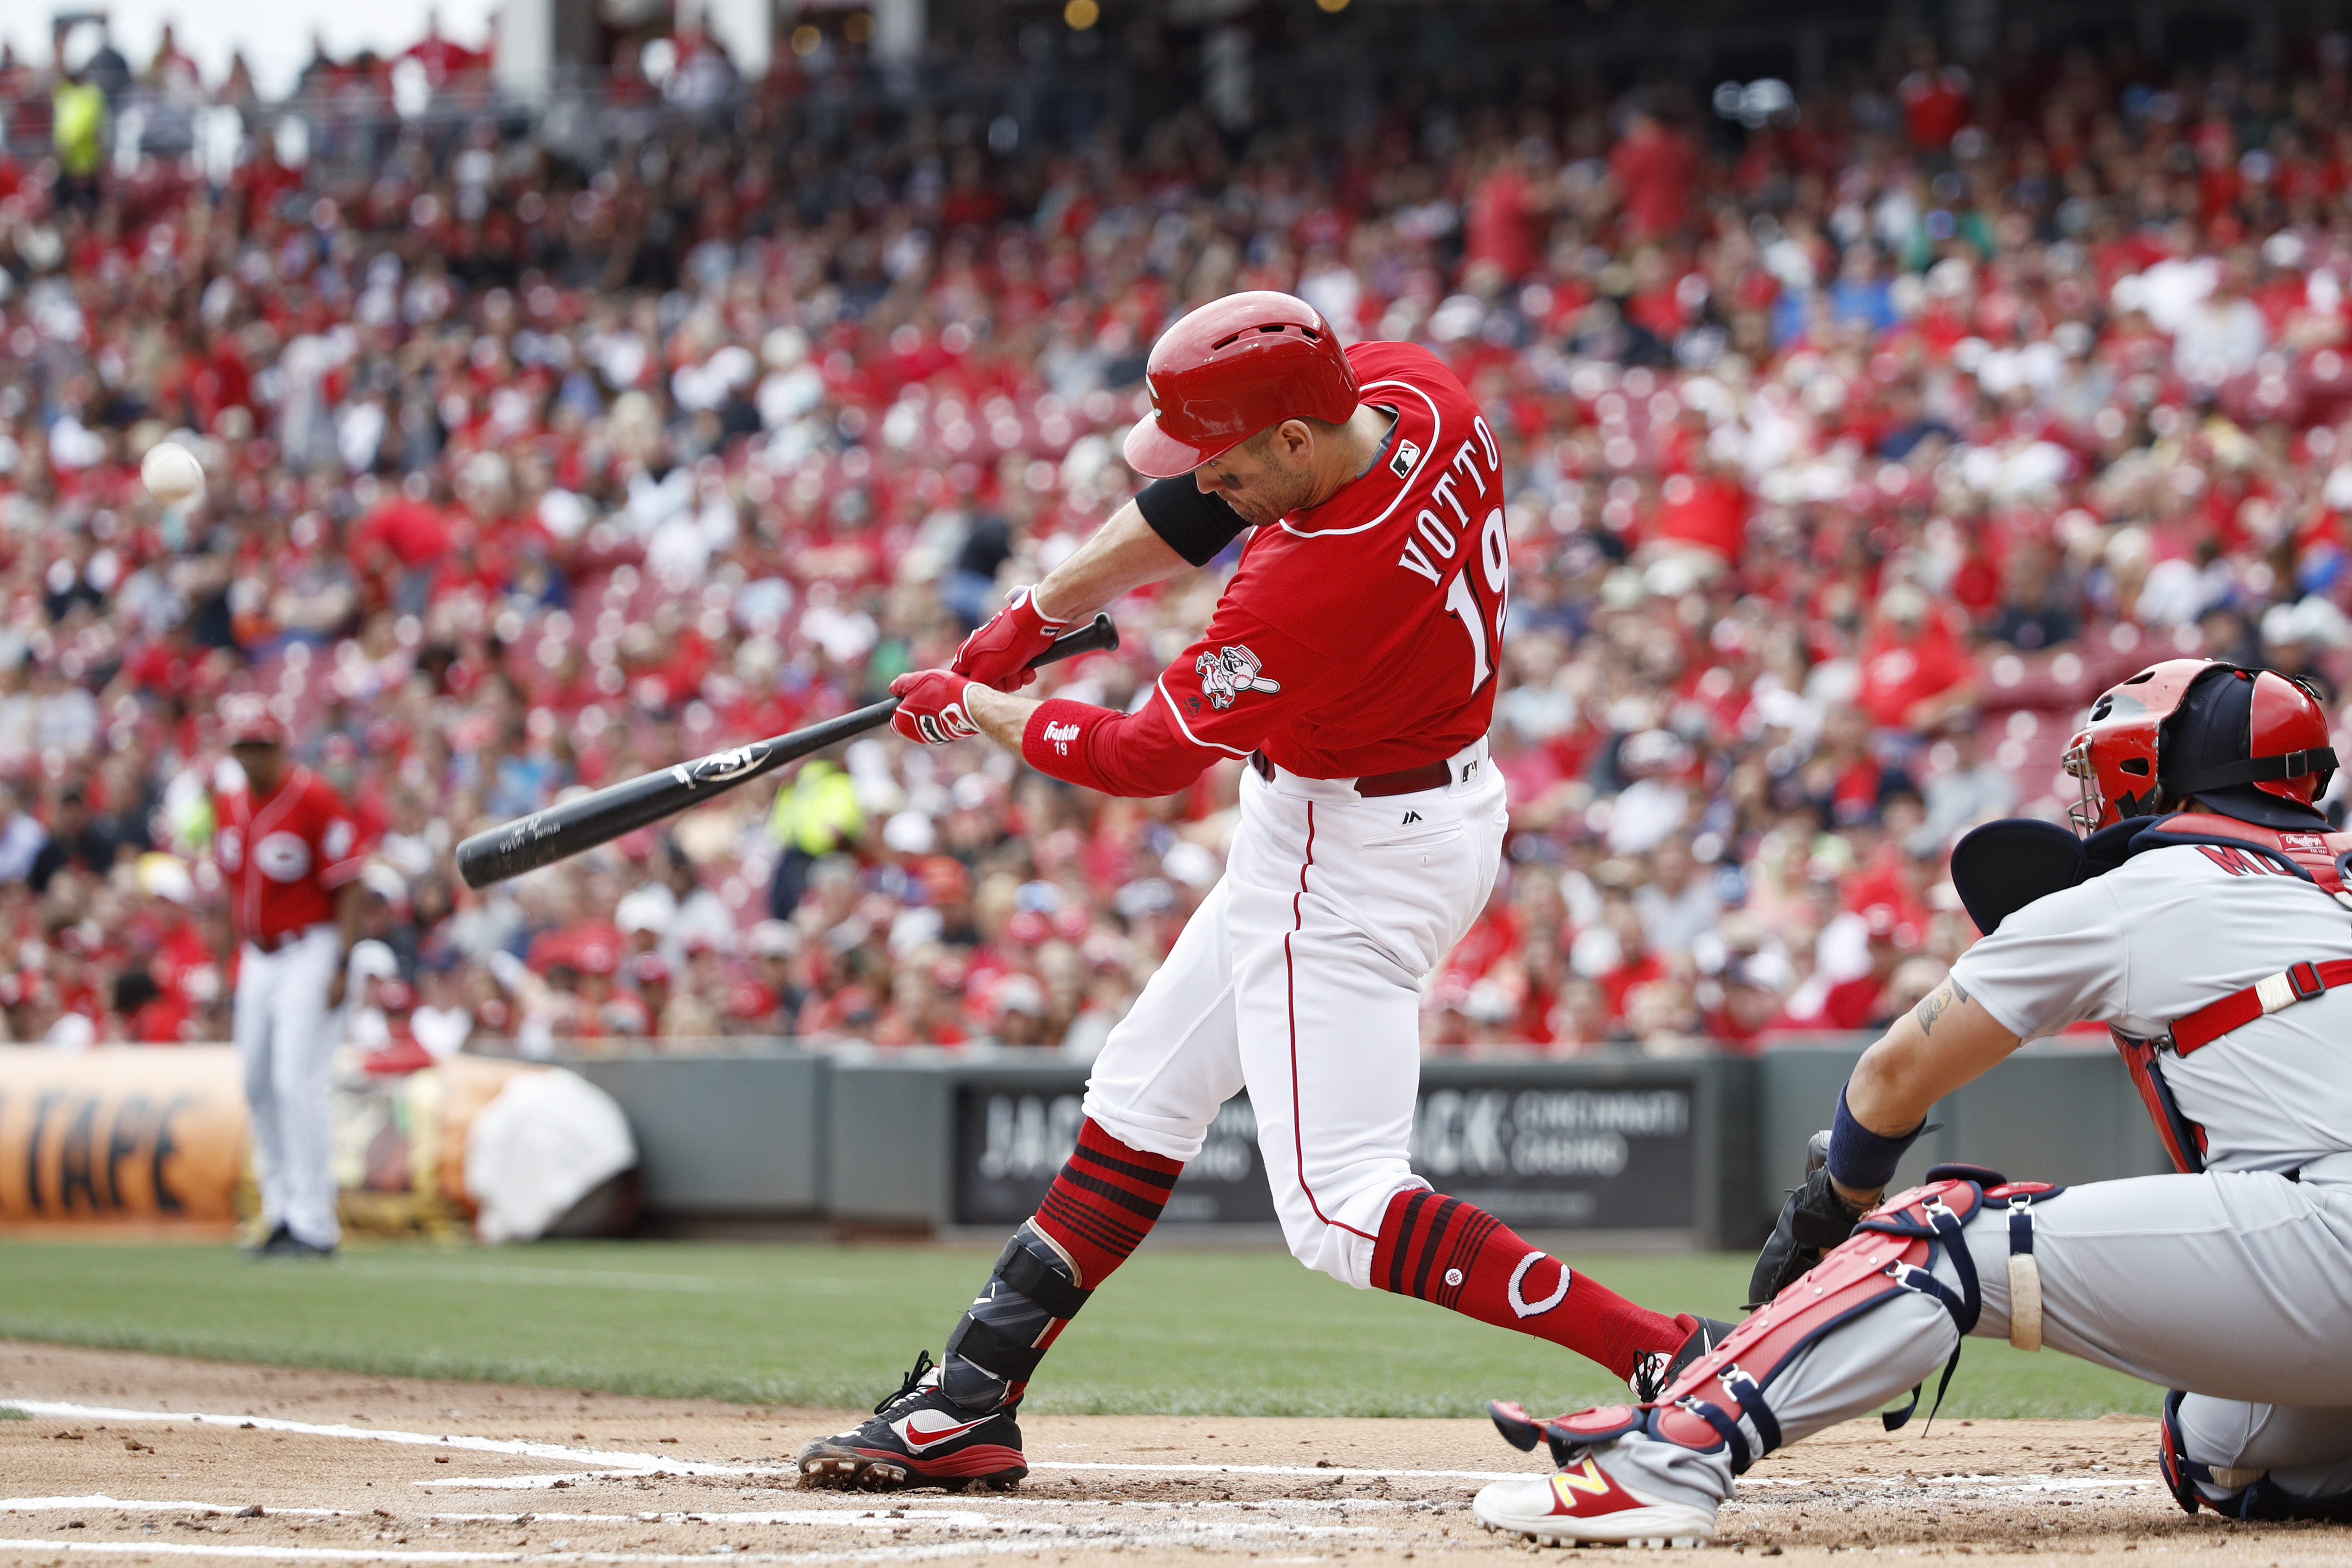 Joey Votto Scores a Home Run for the Cincinnati Reds on His